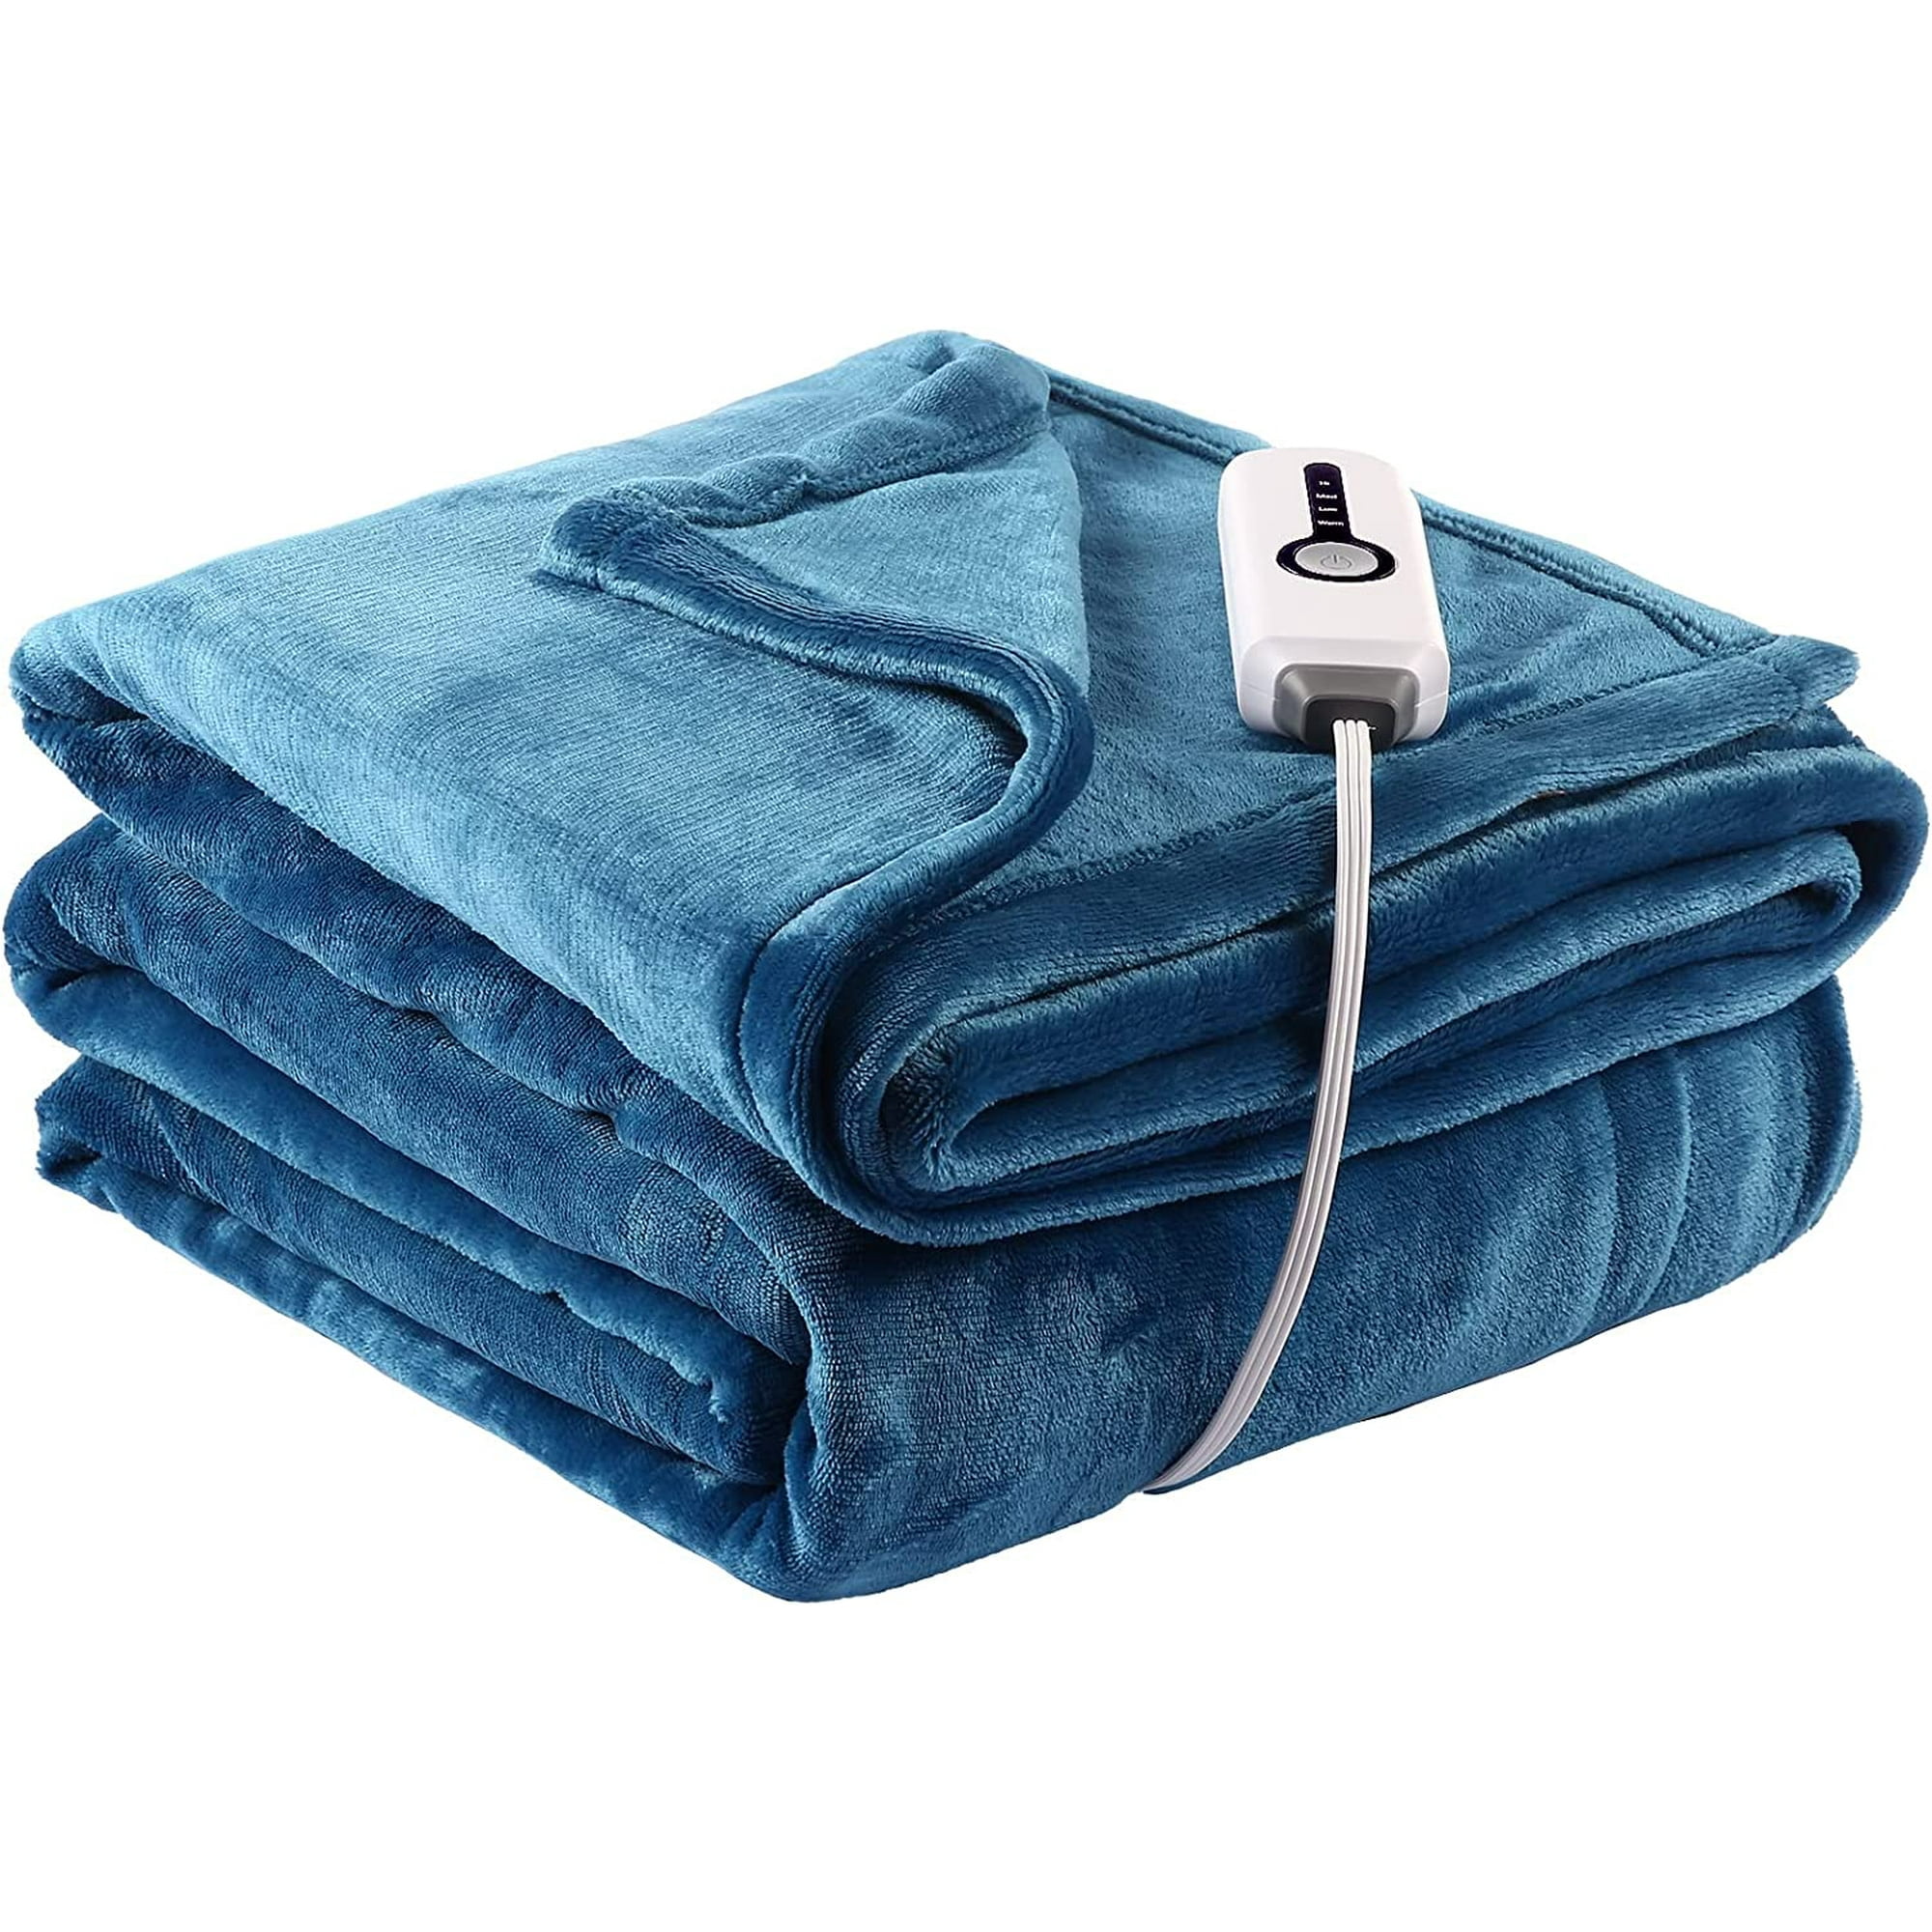  Vremi Electric Blanket - 50 x 60 inches Throw Heated Blanket  with 6 Heat and 8 Time Settings - Fleece Heating Pad with 10 feet Cord, LCD  Display Controller, Auto Shut Off, Washable Cover : Baby